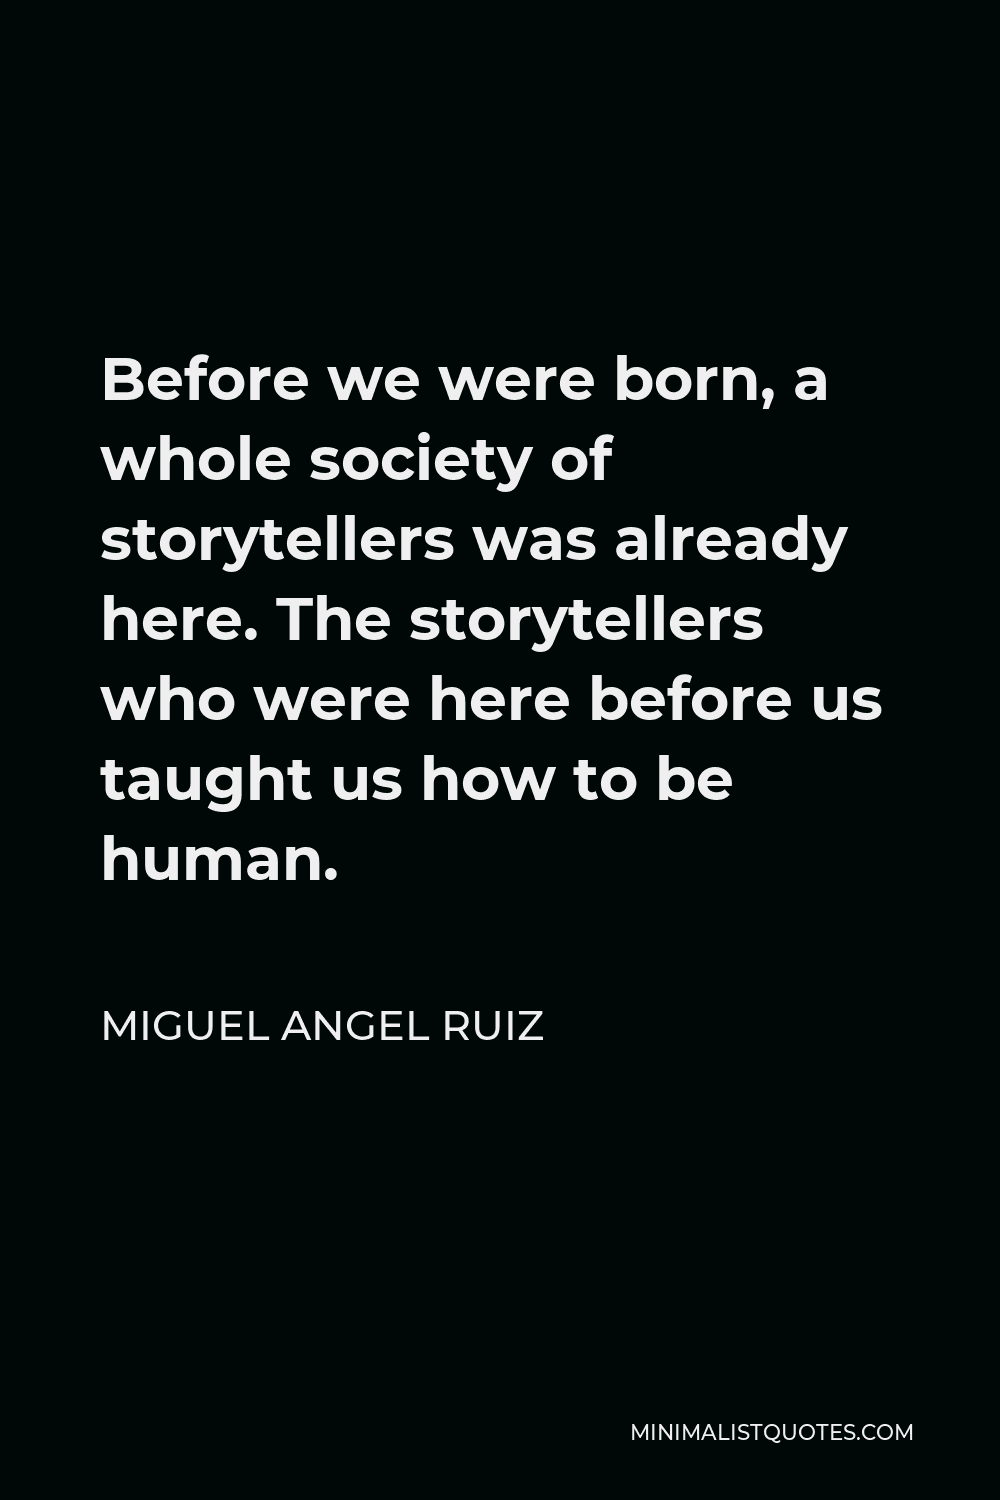 Miguel Angel Ruiz Quote - Before we were born, a whole society of storytellers was already here. The storytellers who were here before us taught us how to be human.